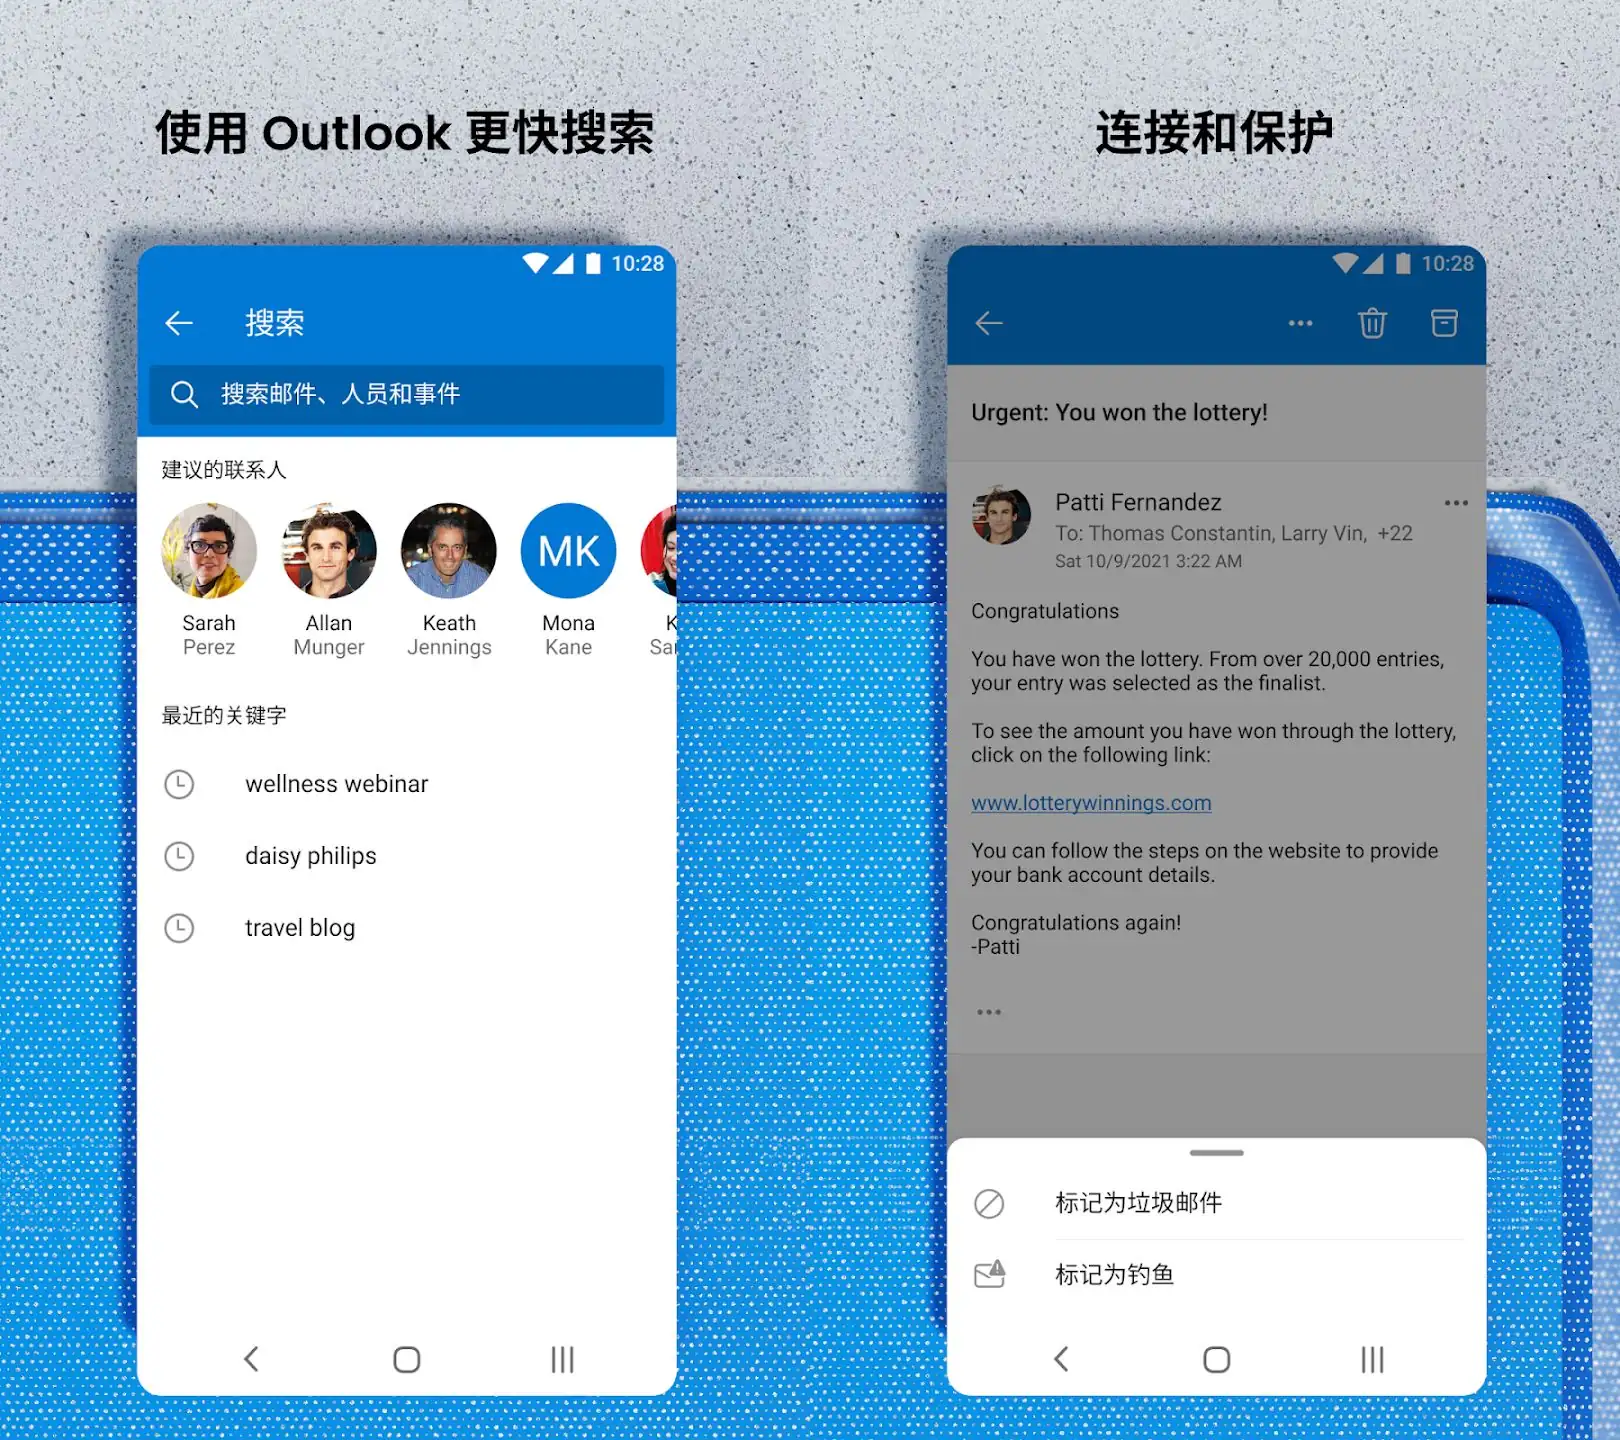 Outlook Lite email app